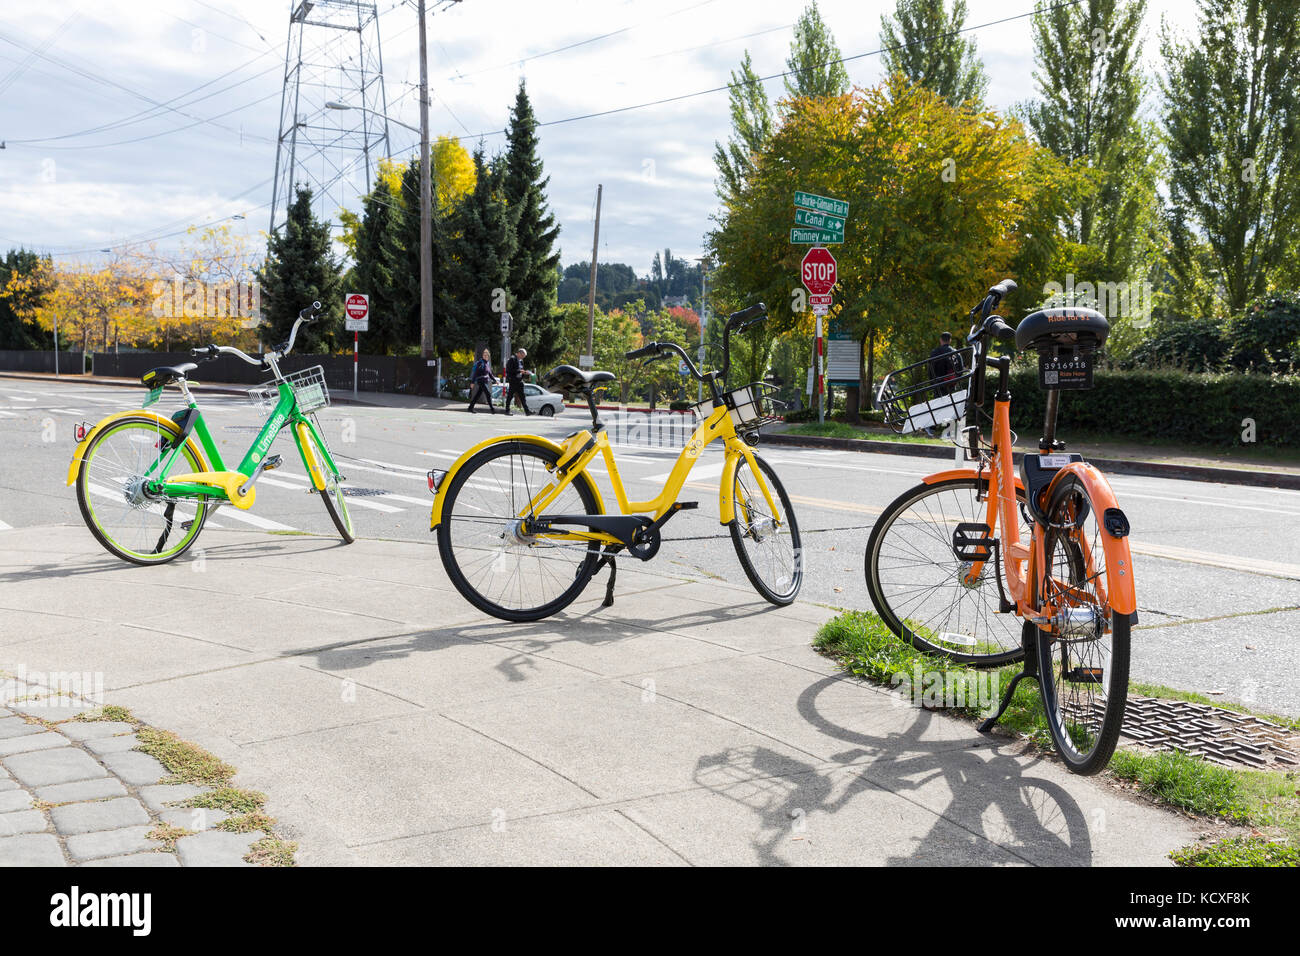 Seattle, Washington: A variety of cycle-share bikes parked at in the Fremont neighborhood. LimeBike (green), Ofo bike (yellow) and Spin bike (orange)  Stock Photo